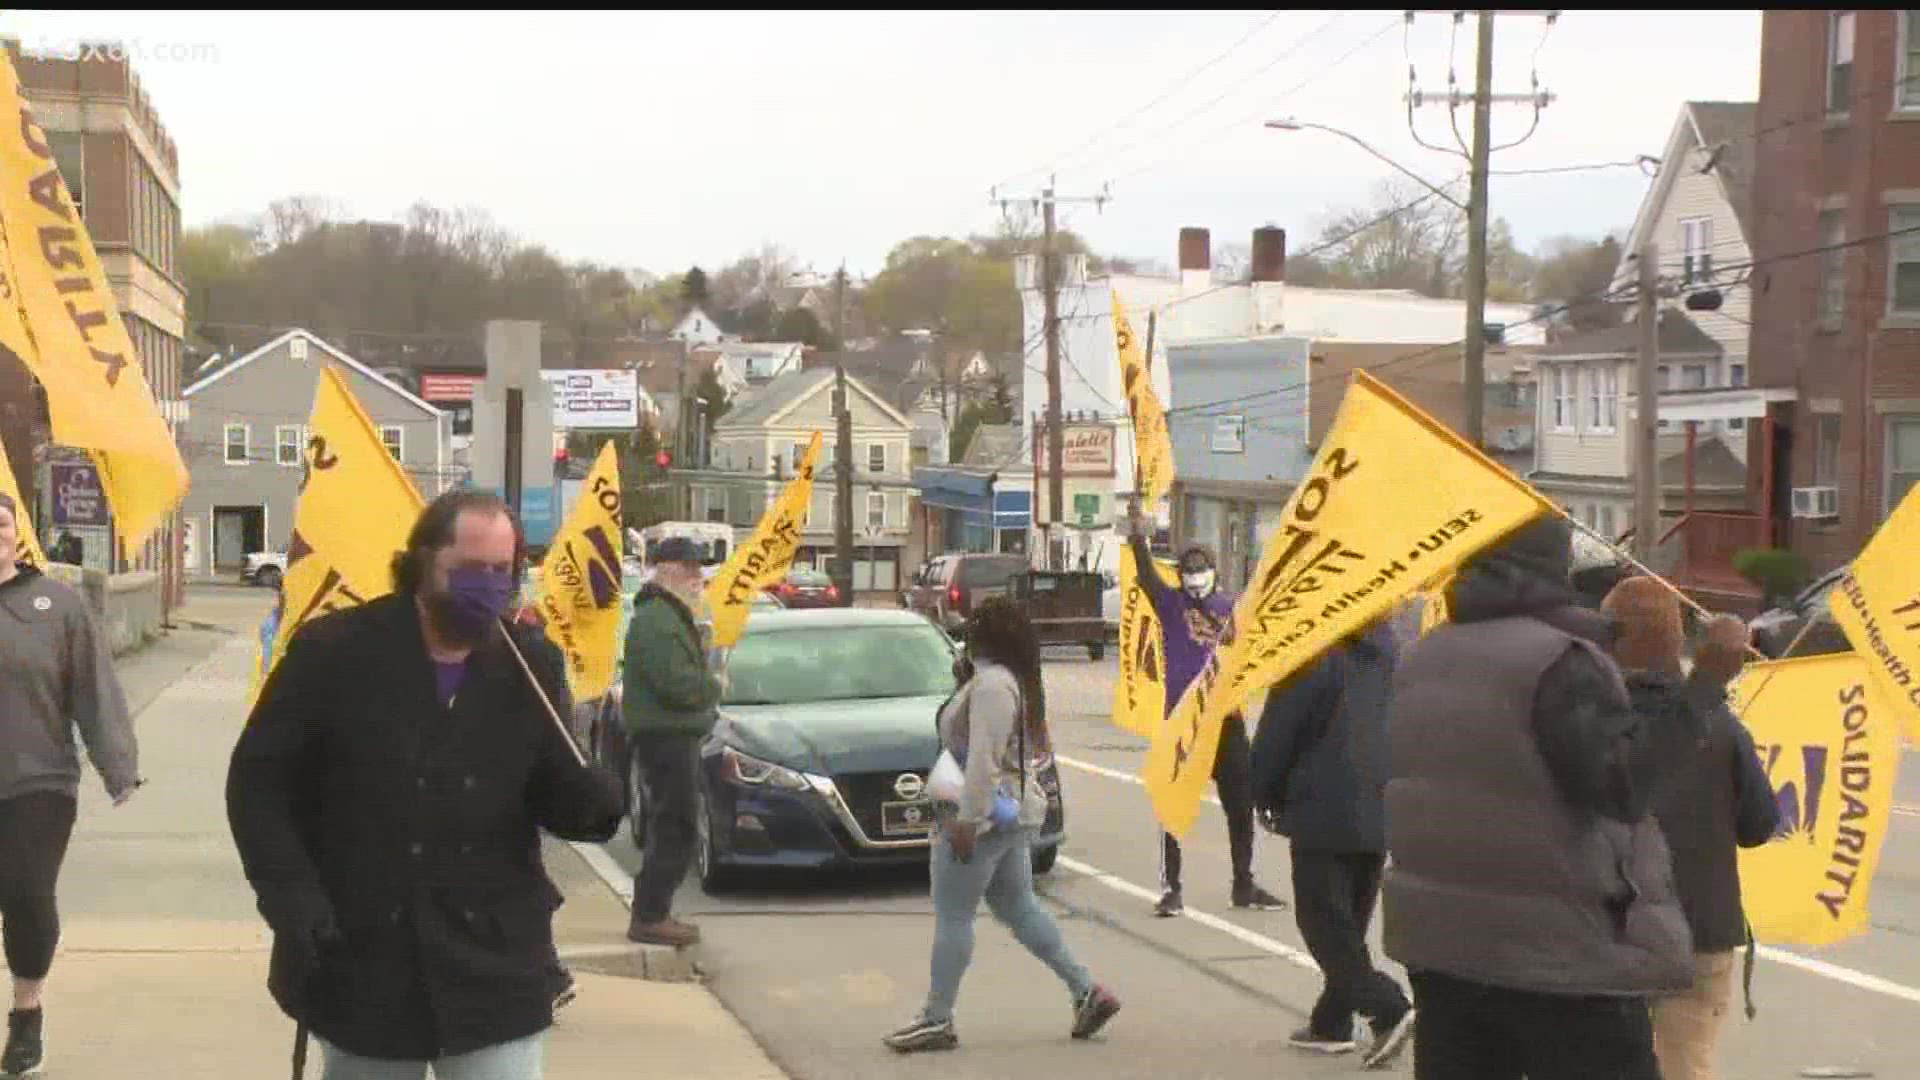 Contract negotiations are expected to resume on Wednesday following the three-day strike.